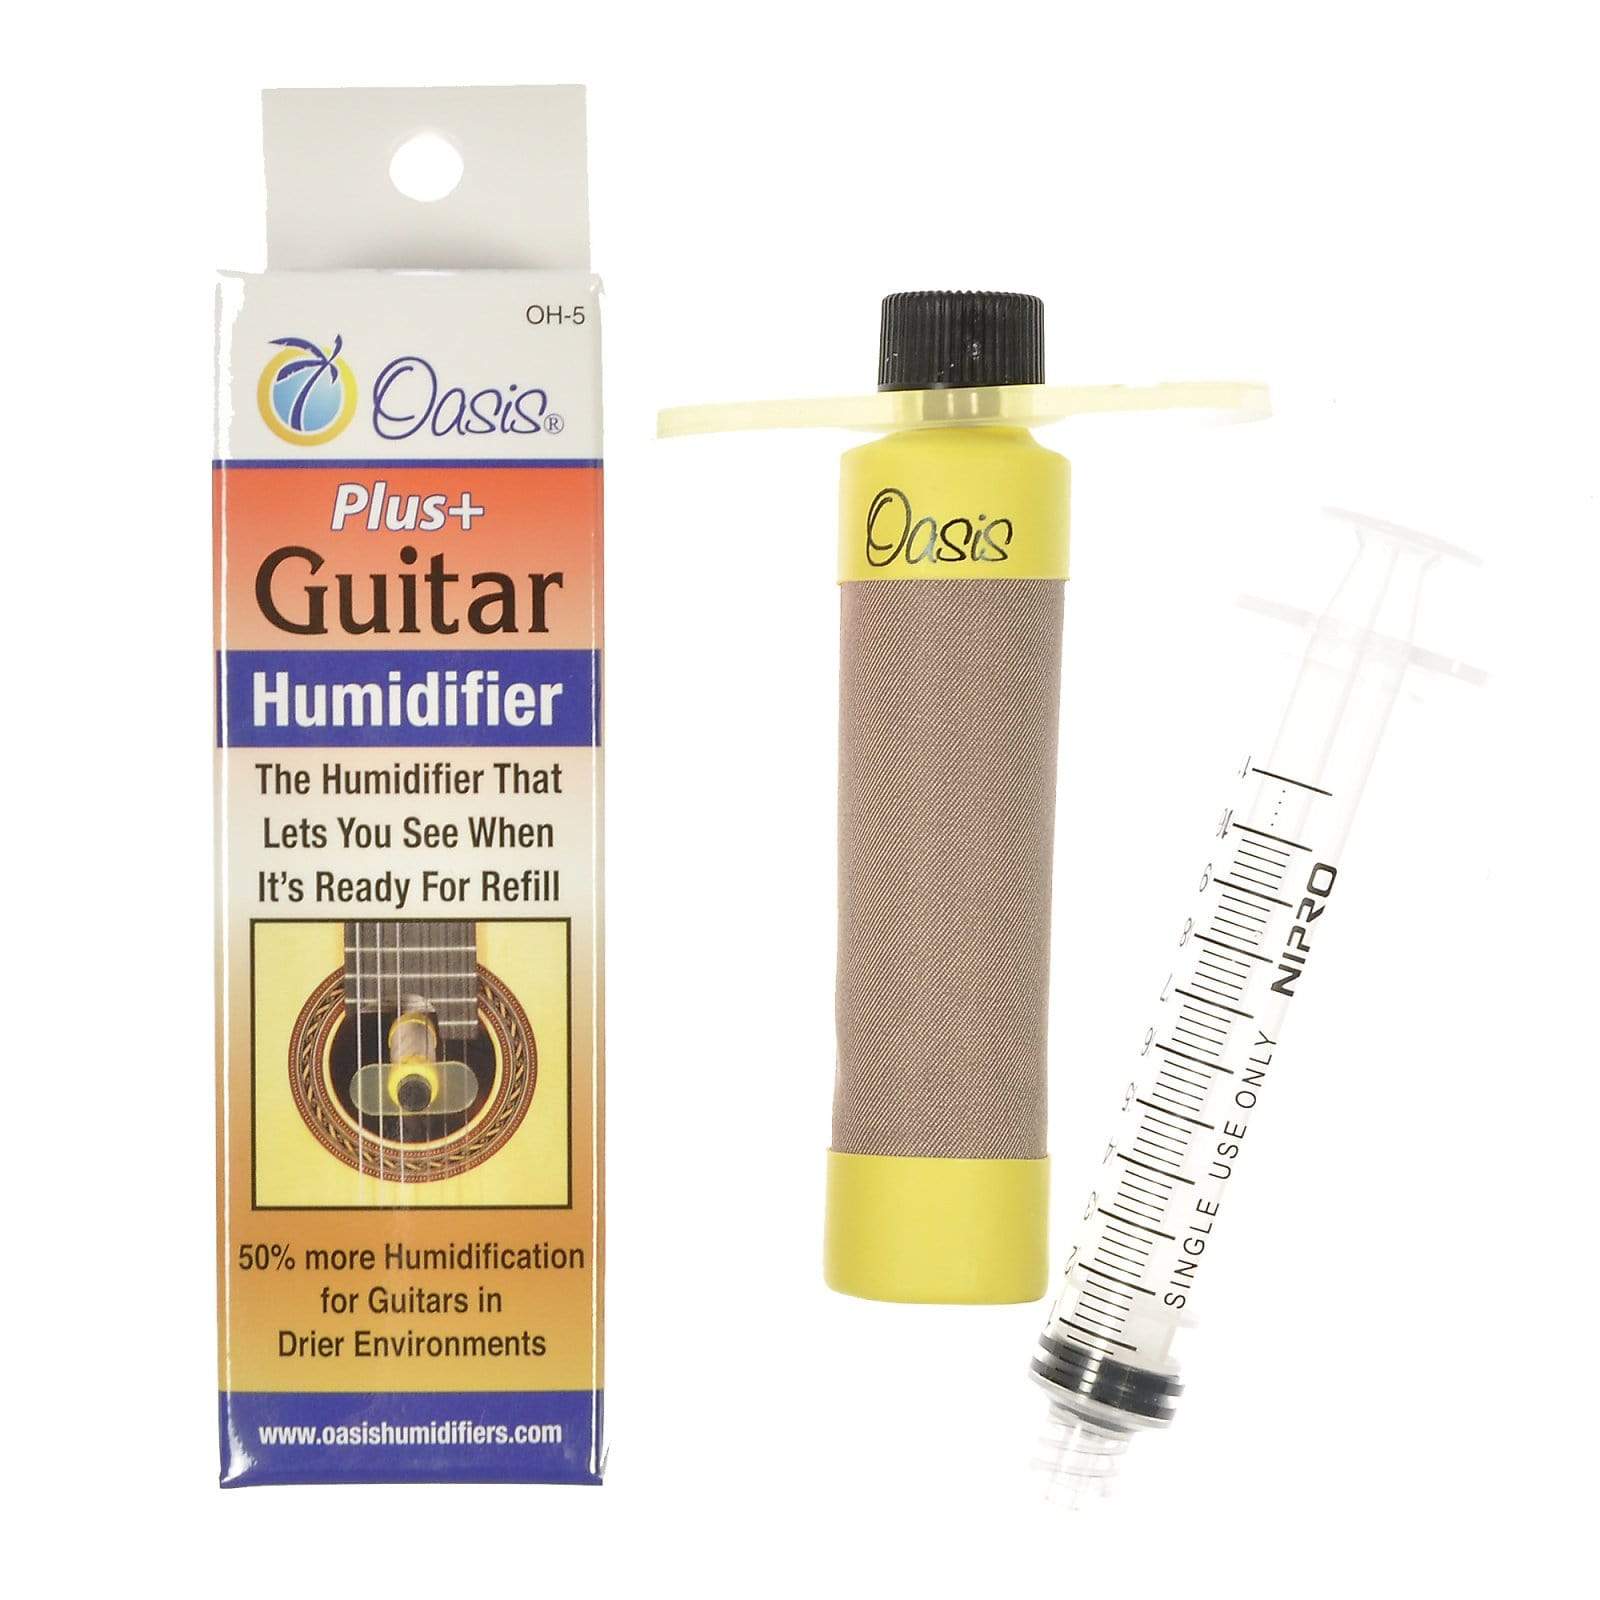 Oasis OH-5 Guitar Plus+ Humidifier Accessories / Humidifiers